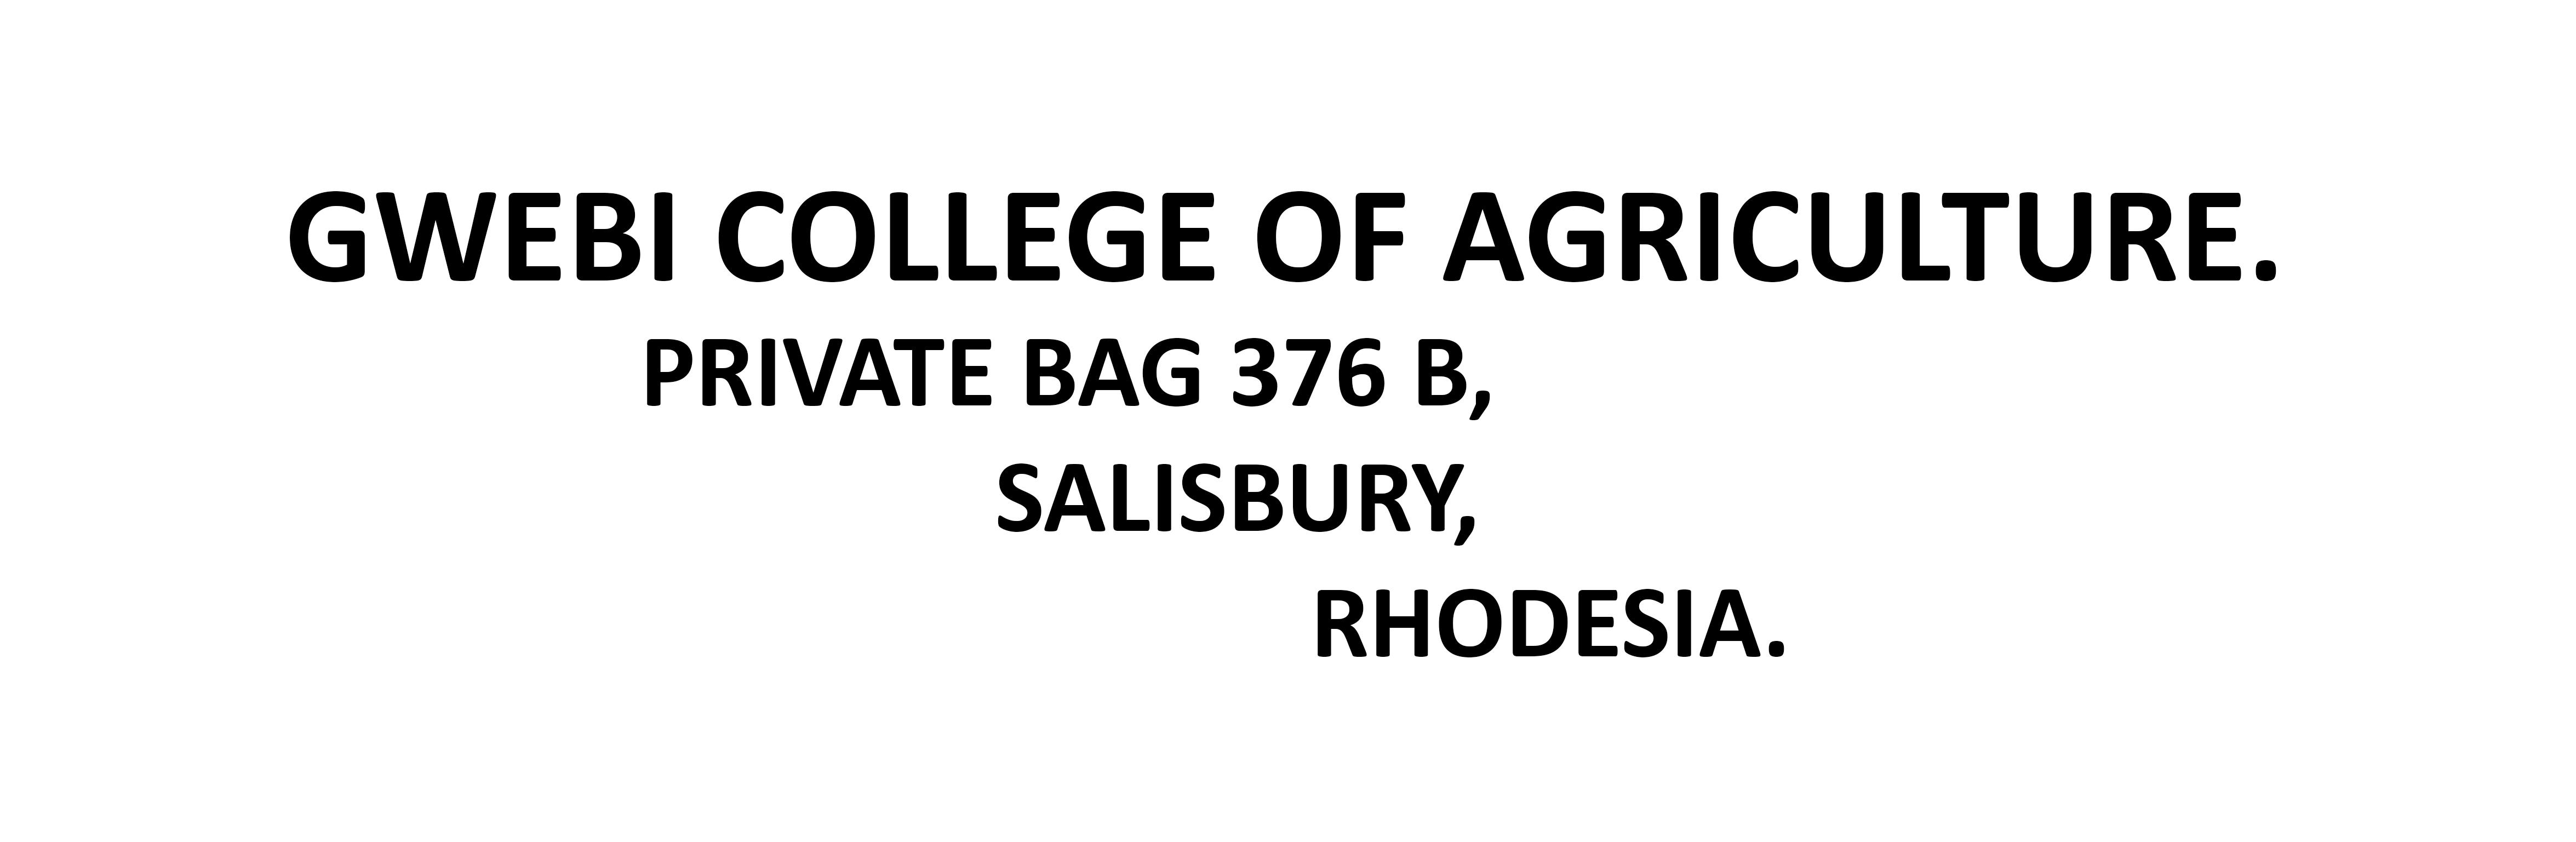 Address for Gwebi College of Agriculture until 1980